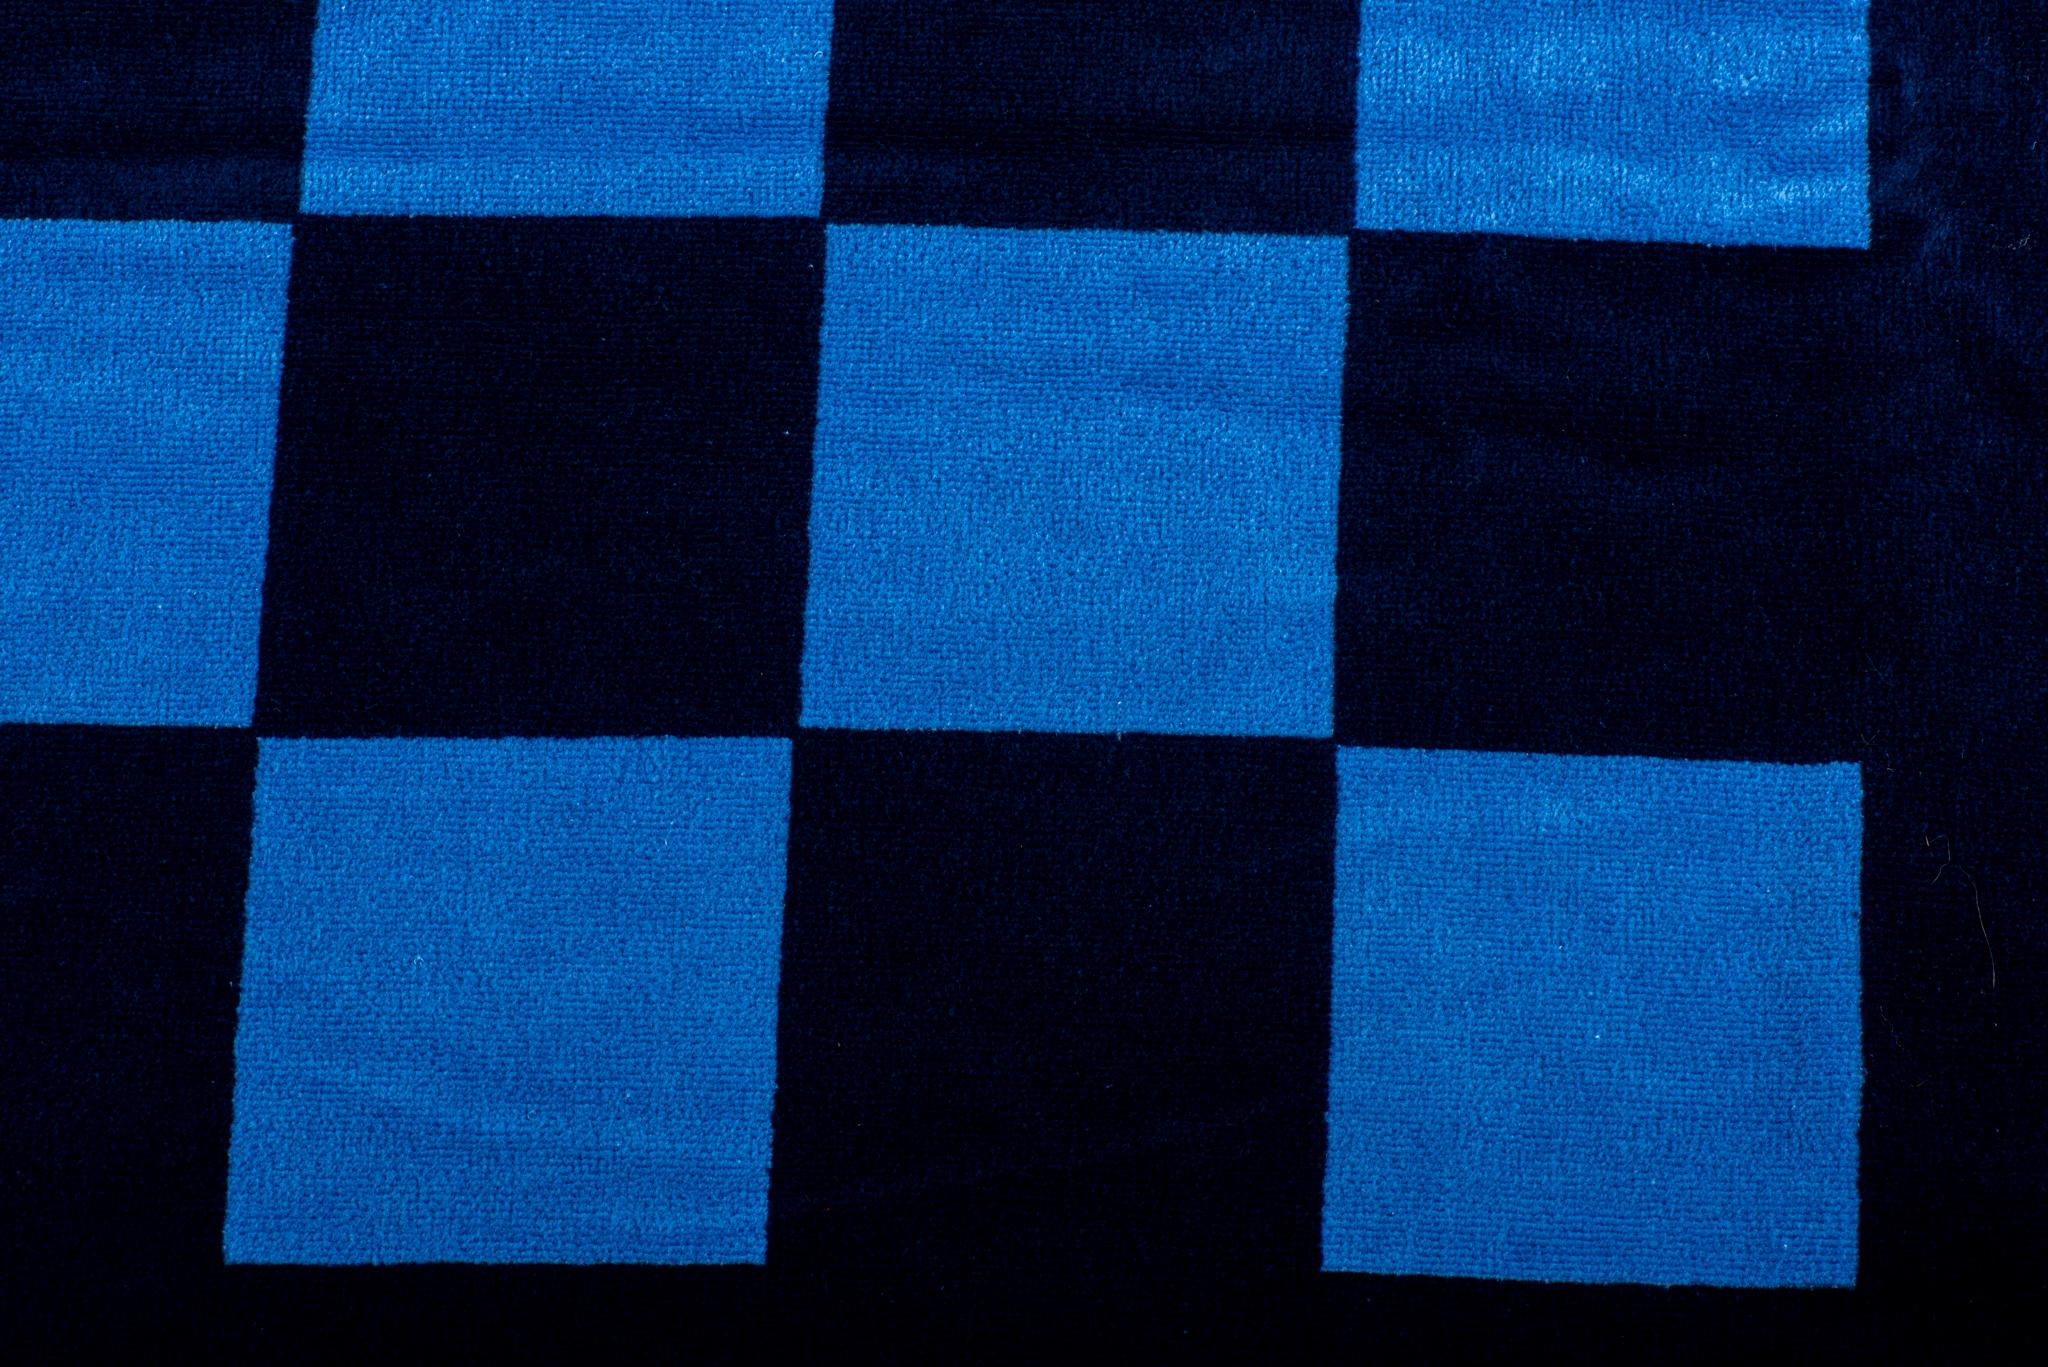 Chanel brand new unisex checkers beach towel, navy and blue combination. Original care tag attached.